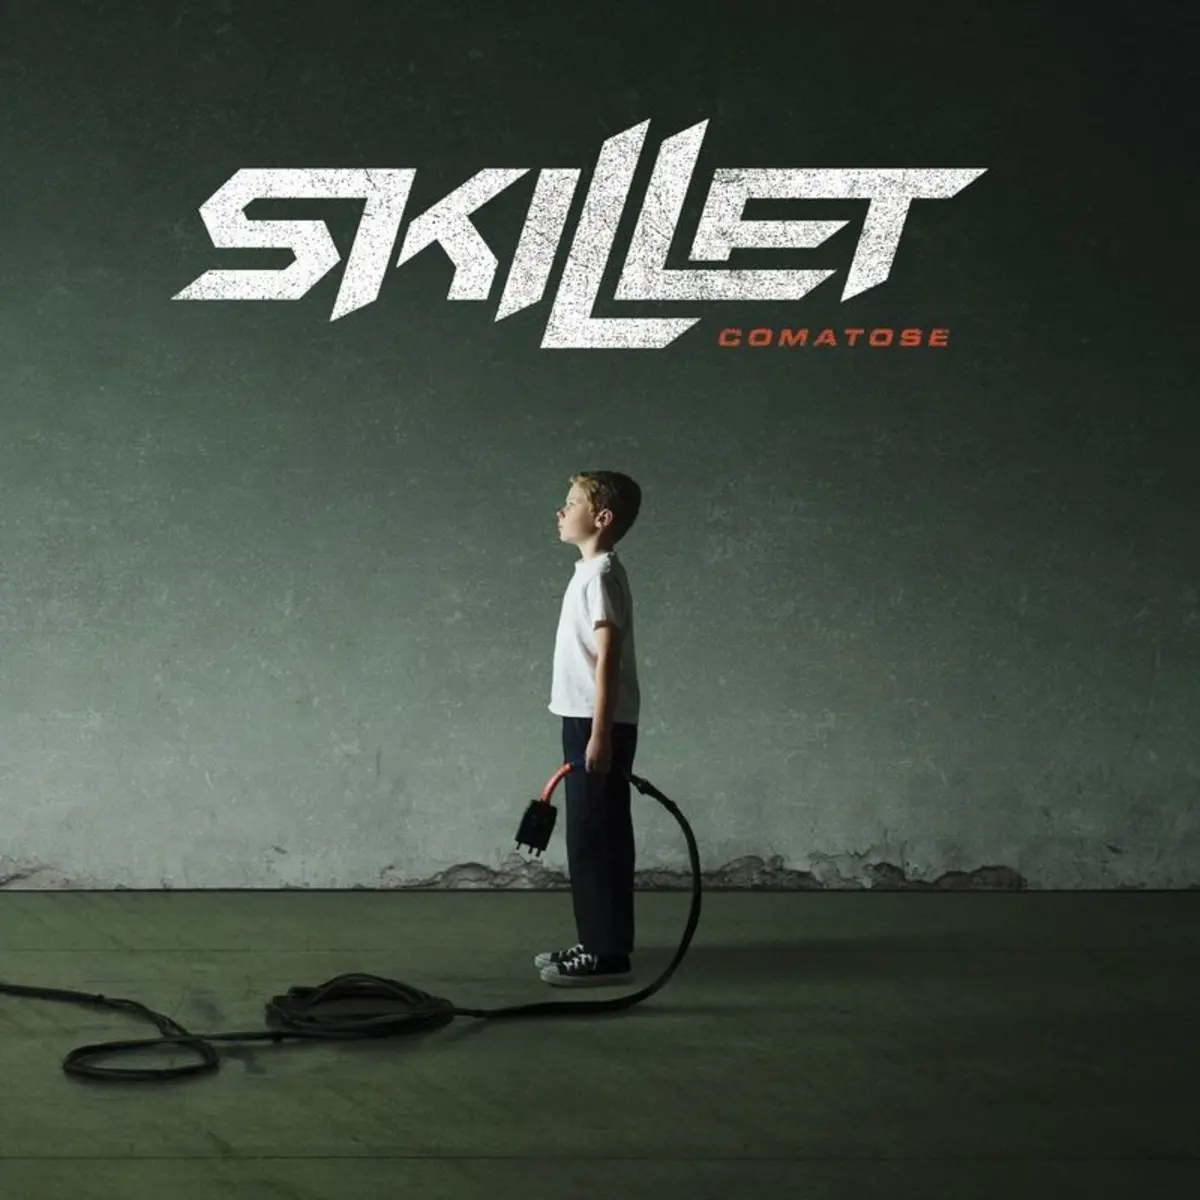 Comatose MP3 Song Download- Comatose Comatose Song By Skillet On.